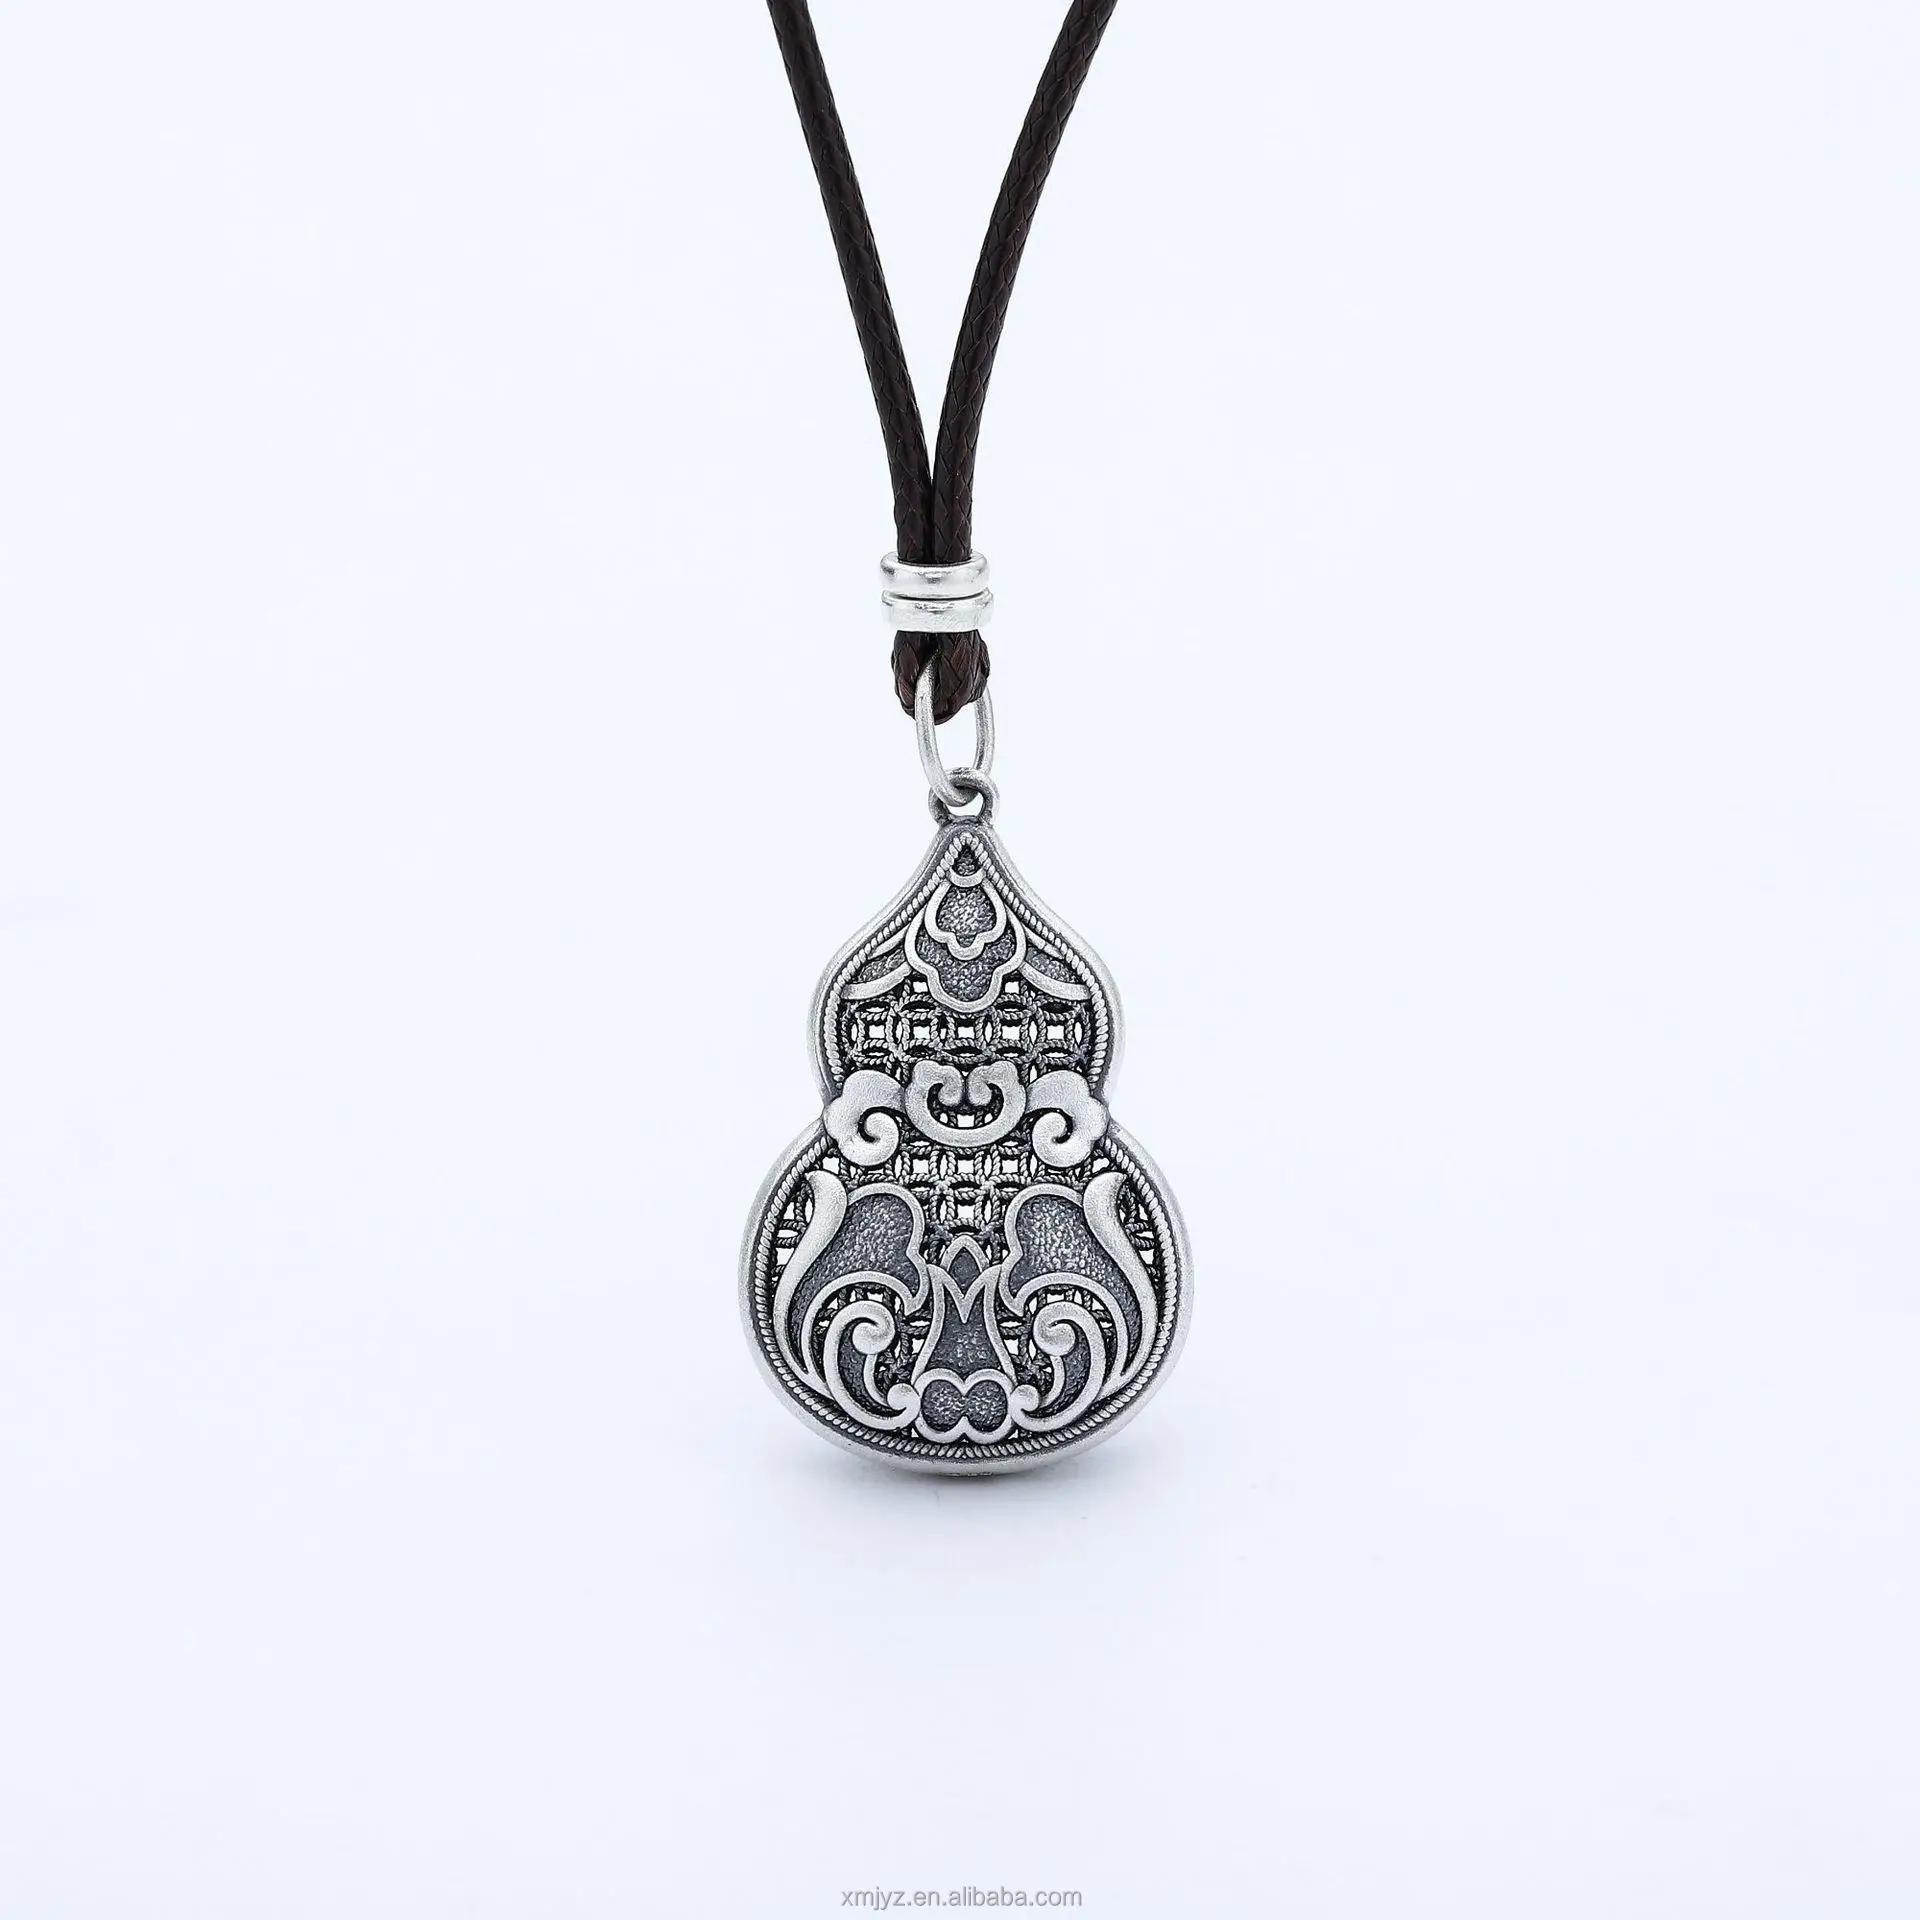 

Certified Pure Silver 999 Fu Lu Calabash Pendent Silk Hollow Relief Craft Retro Ornaments Car Hanging Keychain Gifts